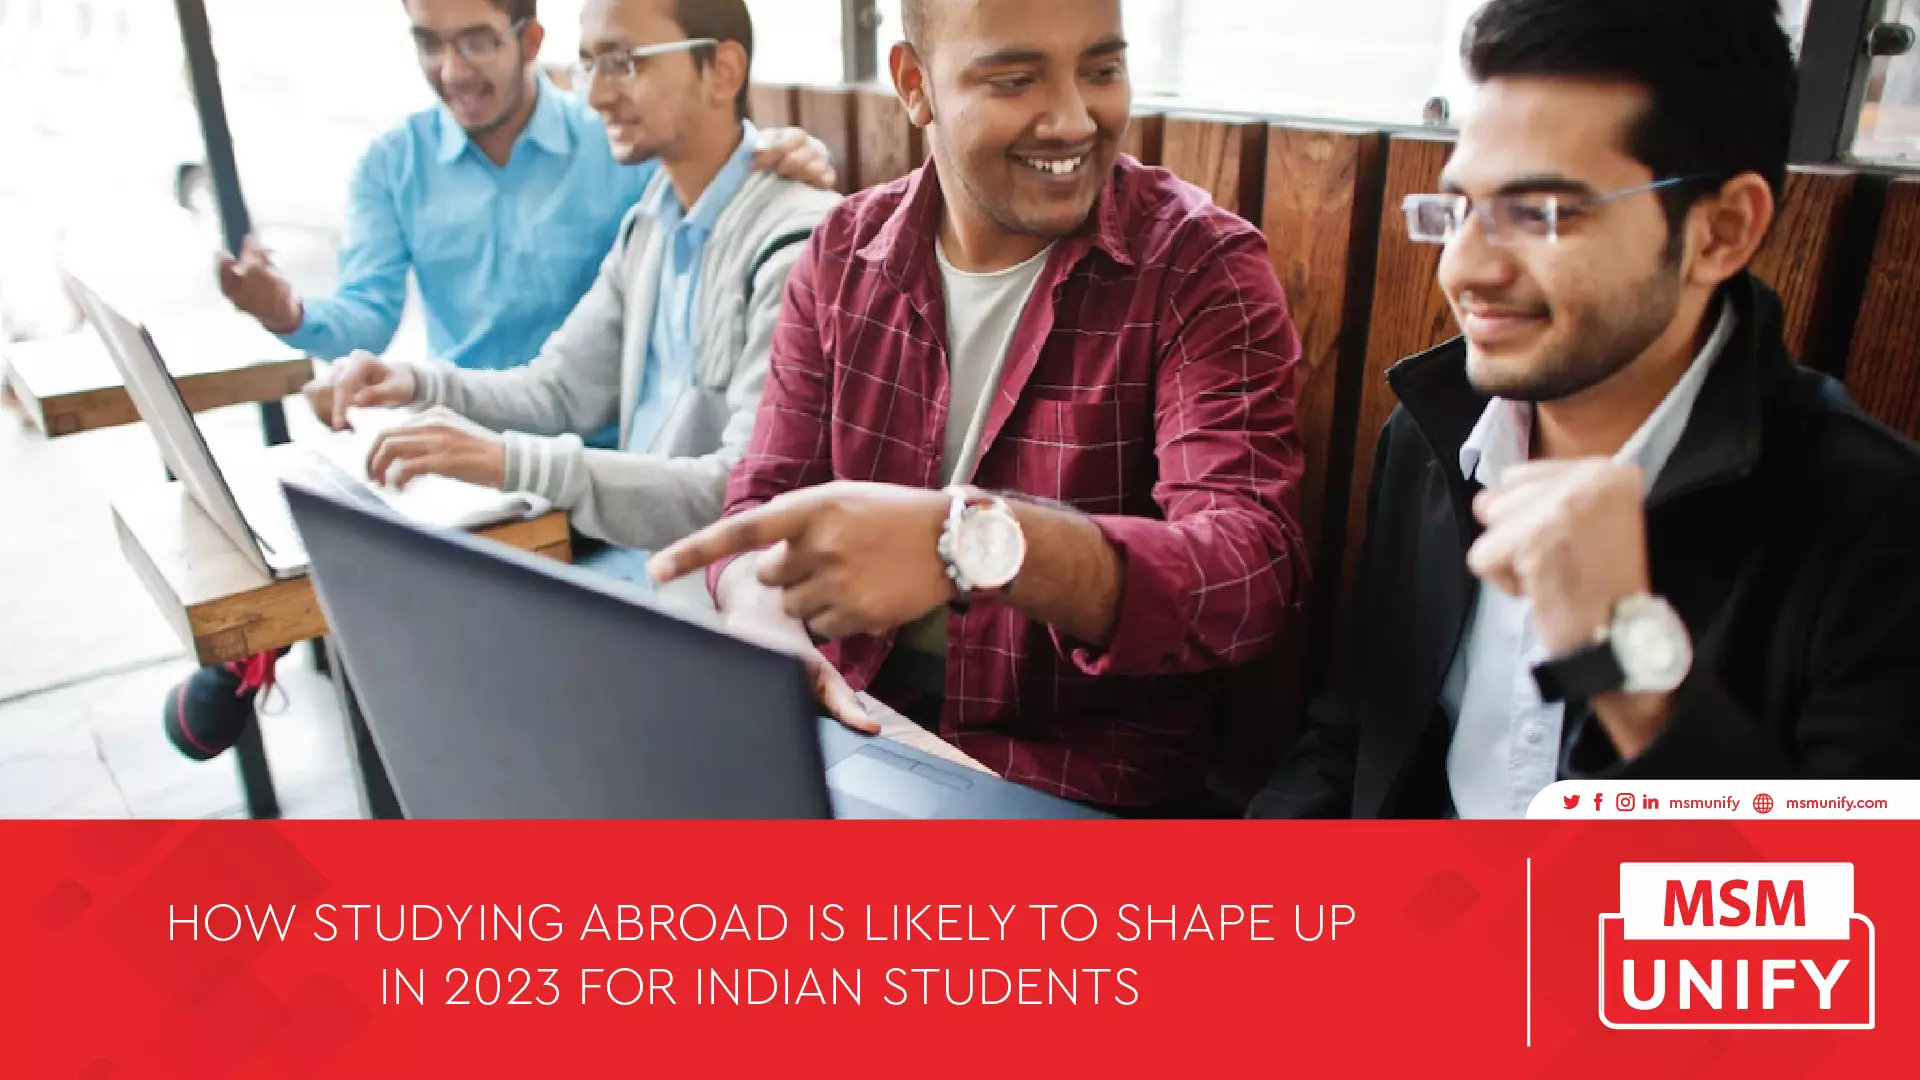 010423 MSM Unify How studying abroad is likely to shape up in 2023 for Indian Students 01